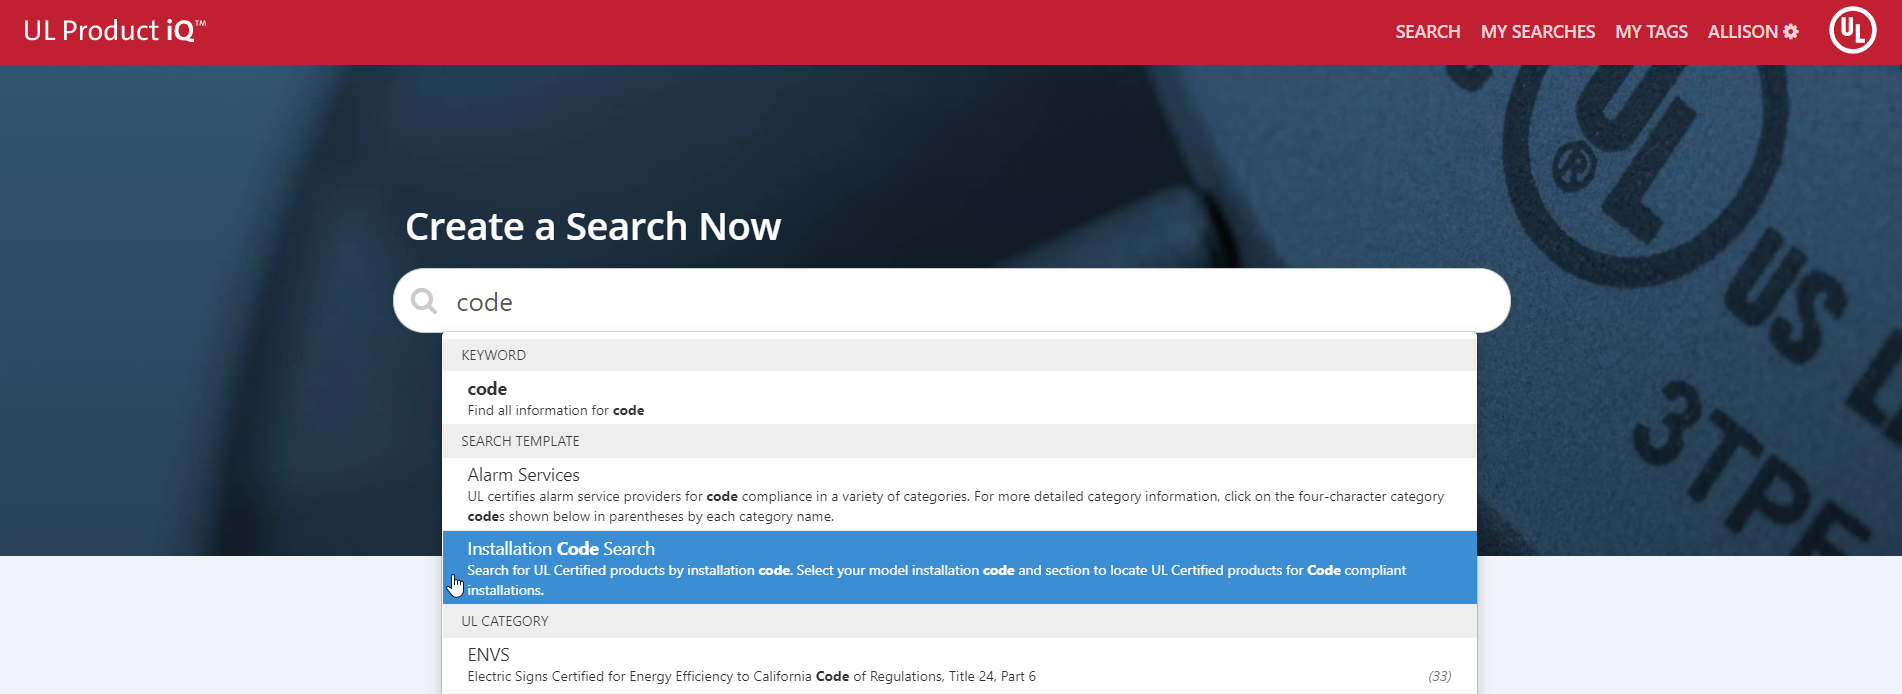 Product IQ Search